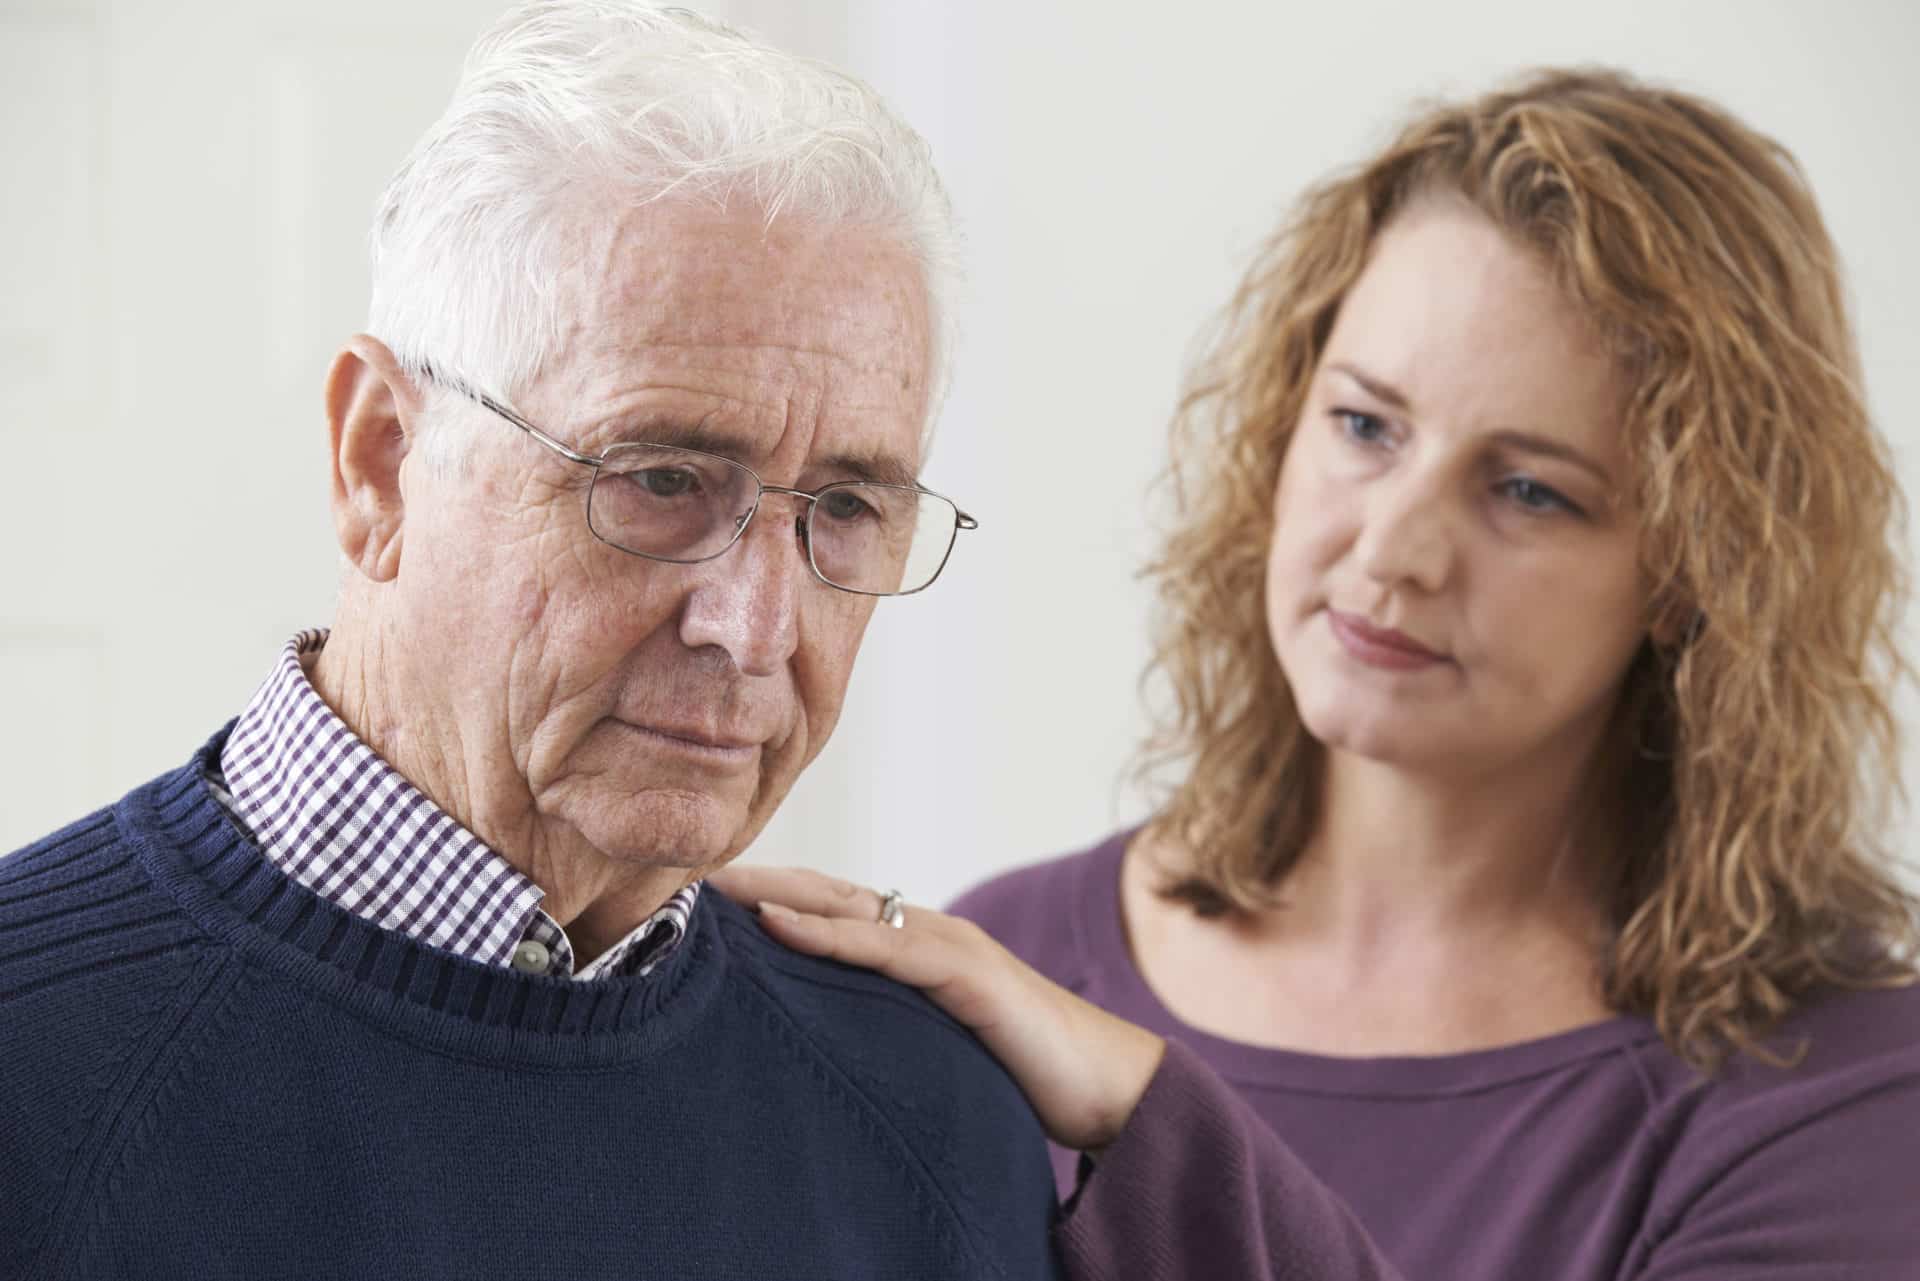 What To Do If You Suspect Elder Abuse